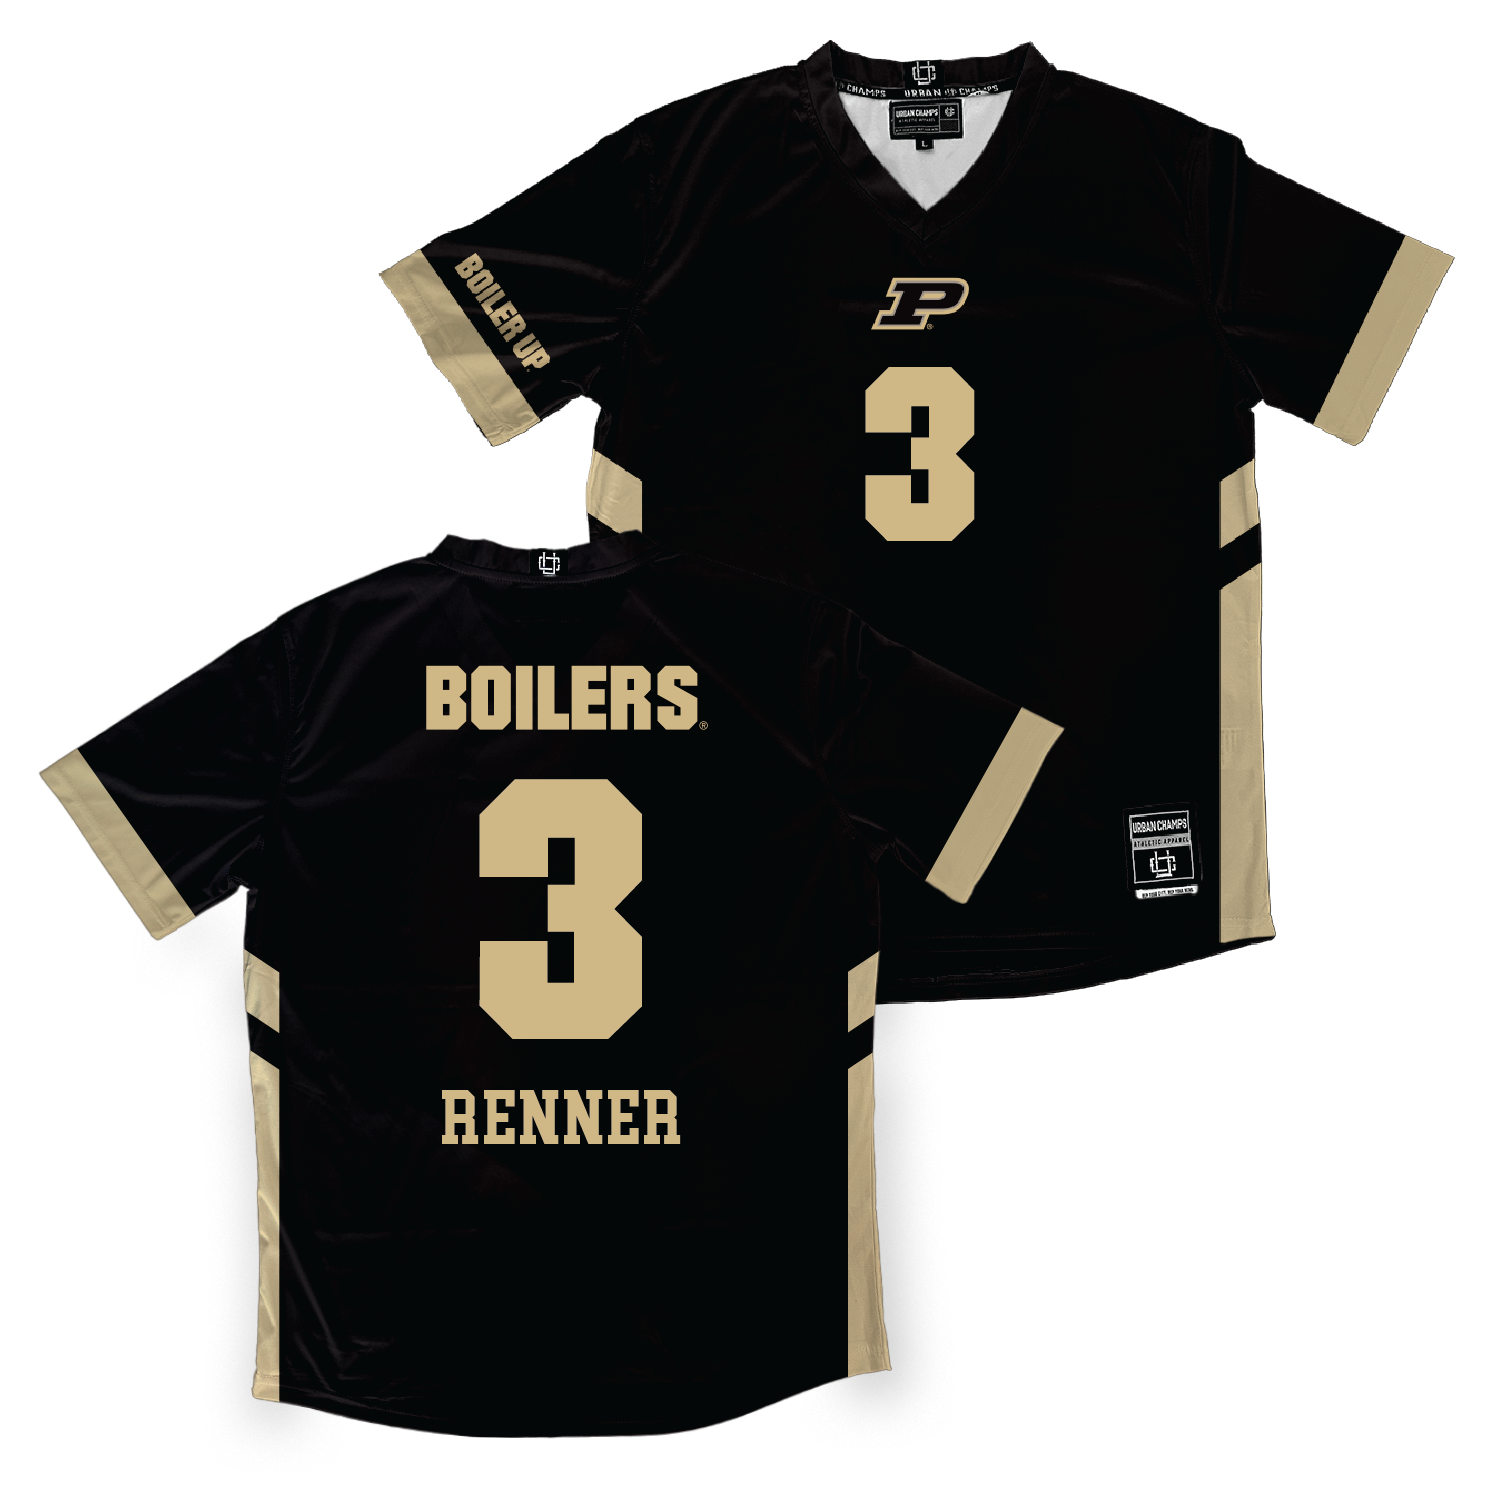 Black Purdue Women's Volleyball Jersey - Megan Renner | #3 Youth Small